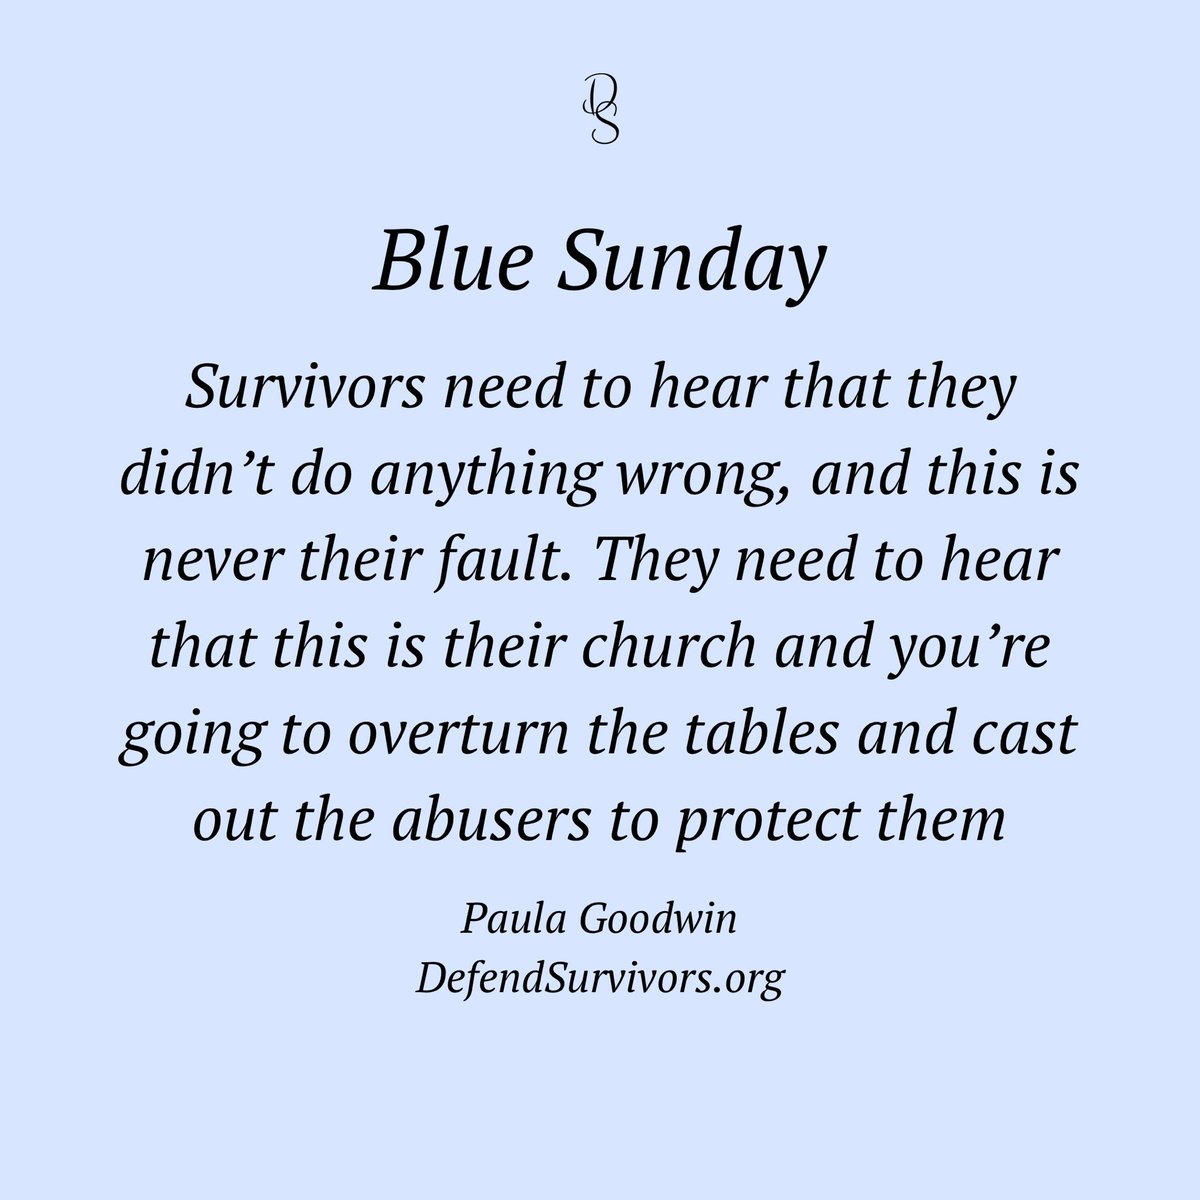 Blue Sunday - Survivors need to hear that they didn't do anything wrong, and this is never their fault. They need to hear that this is their church and you're going to overturn the tables and cast out the abusers to protect them. #BlueSunday #childabusepreventionmonth